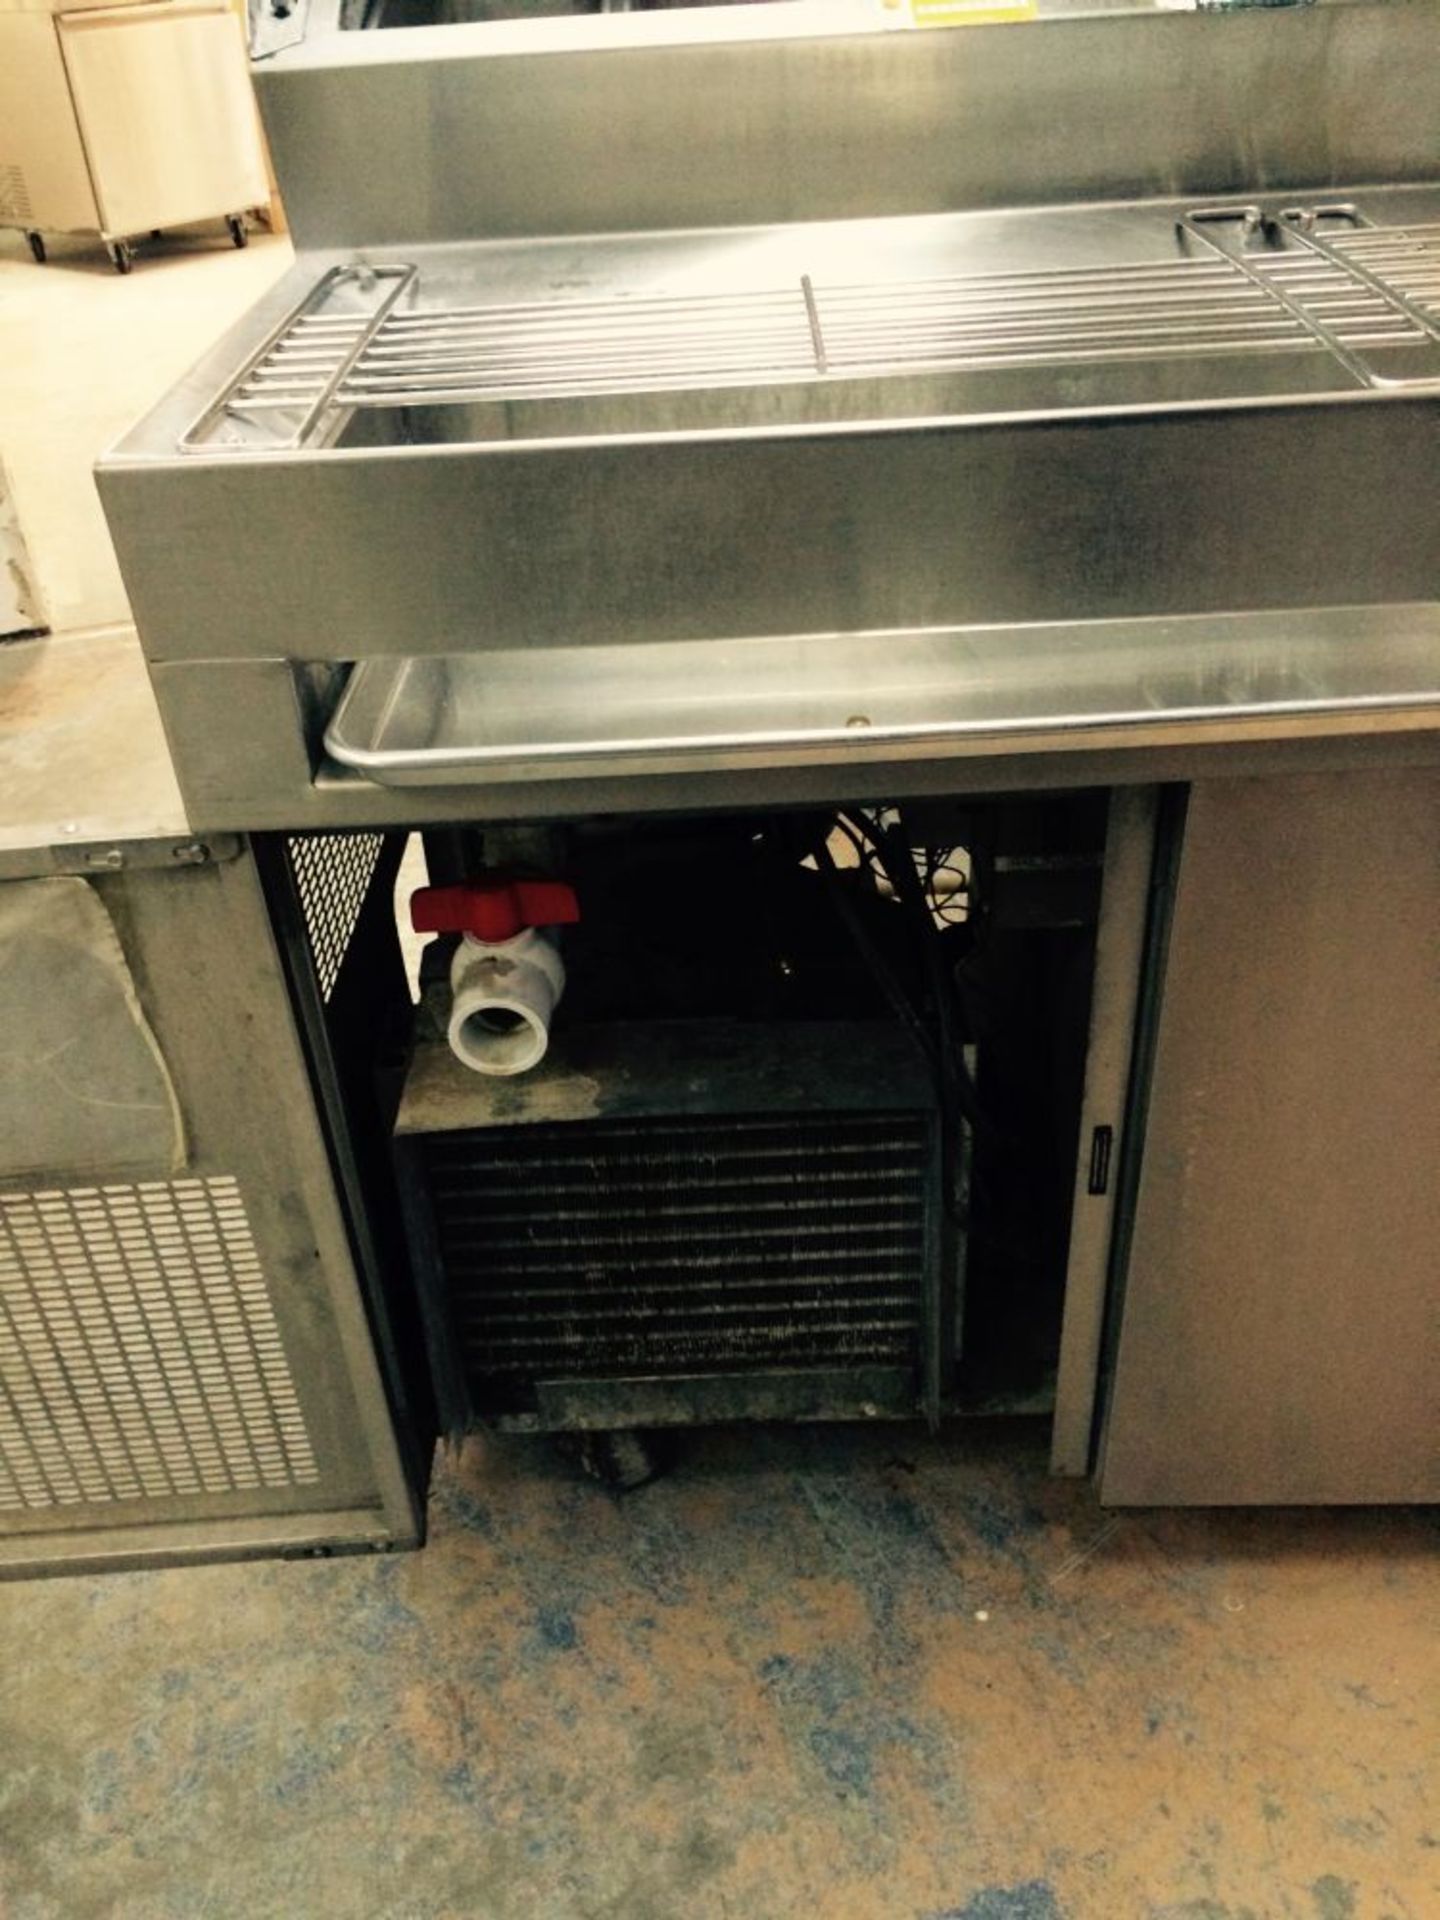 Randell Pizza Prep Table - Model DPM102L FOB Kelowna Contact Jerry For Details 604-808-5900 - Image 4 of 5